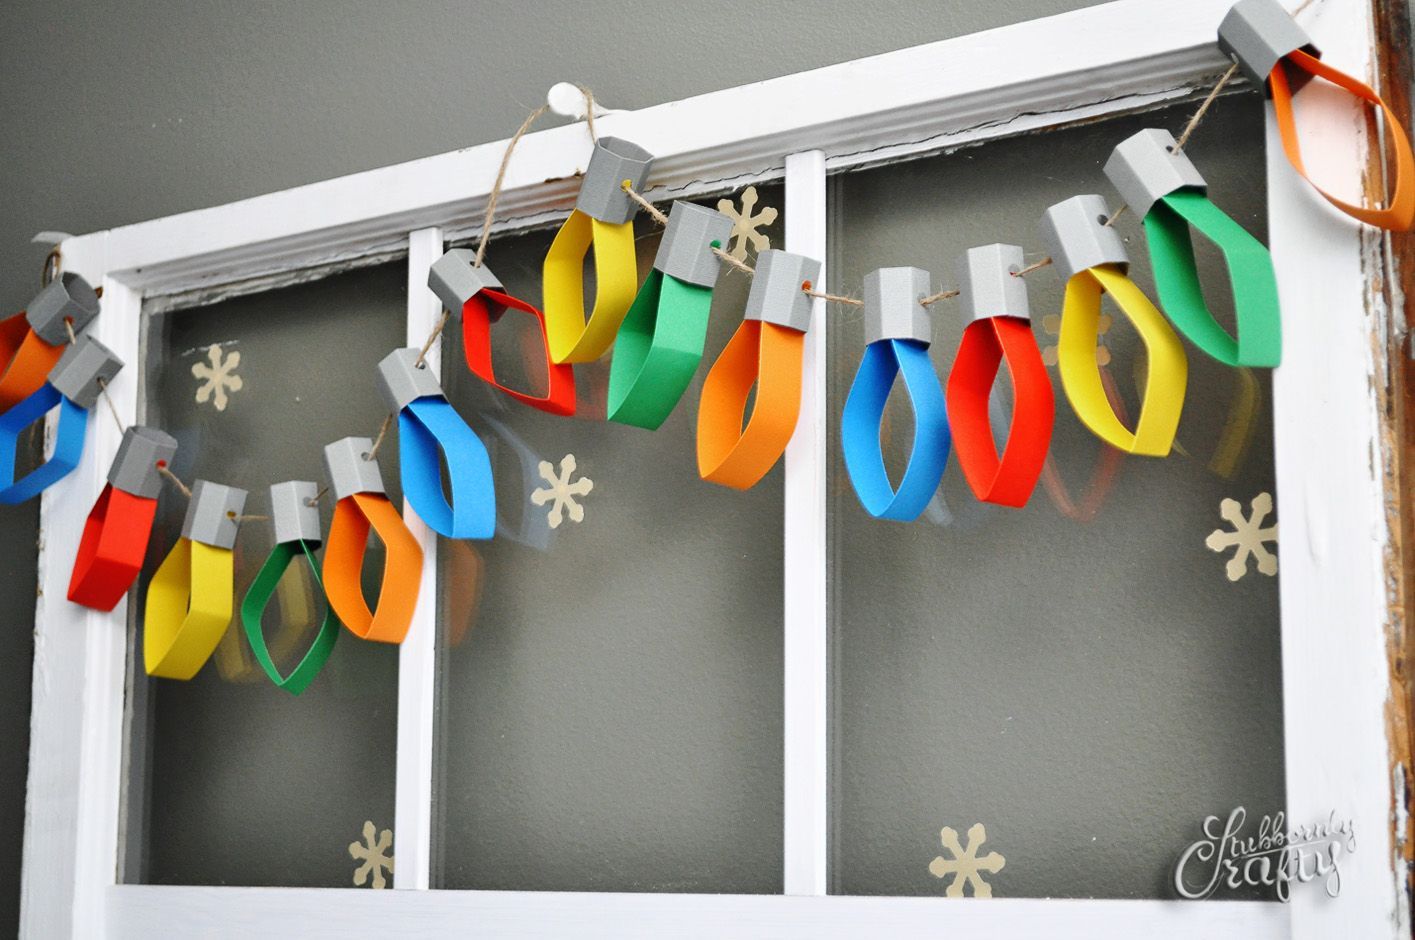 This Christmas lights garland is a simple project that will level up your holiday decor and maybe even give the kids something to